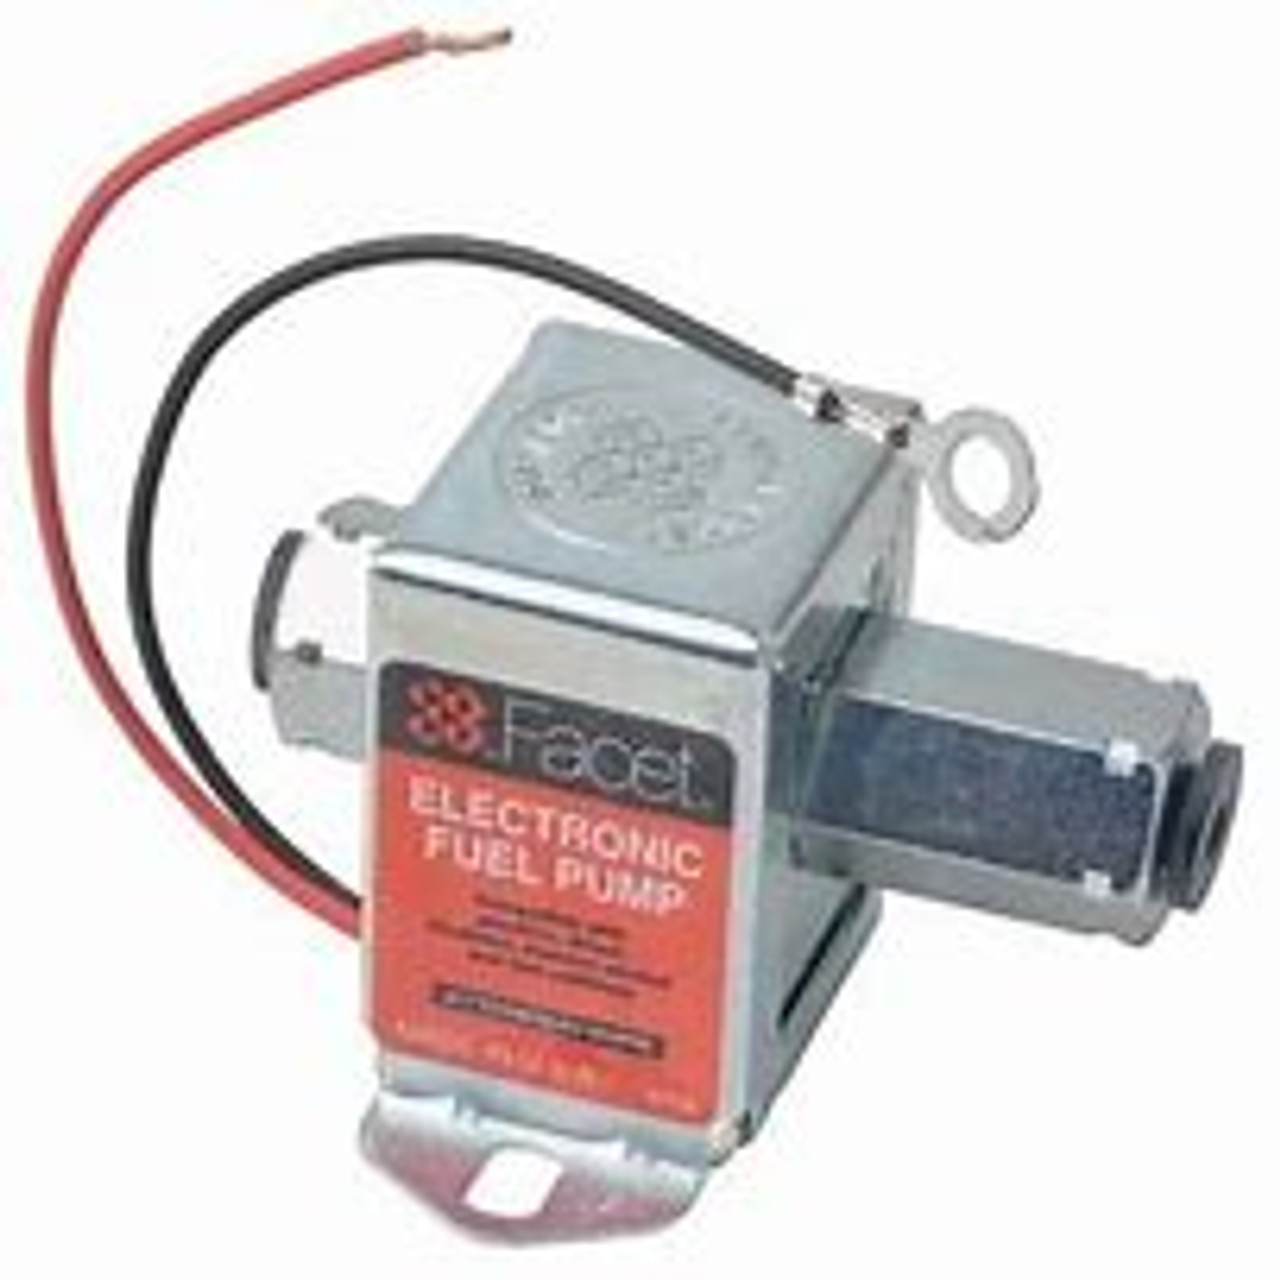 40194 - Facet Solid State electric fuel pump